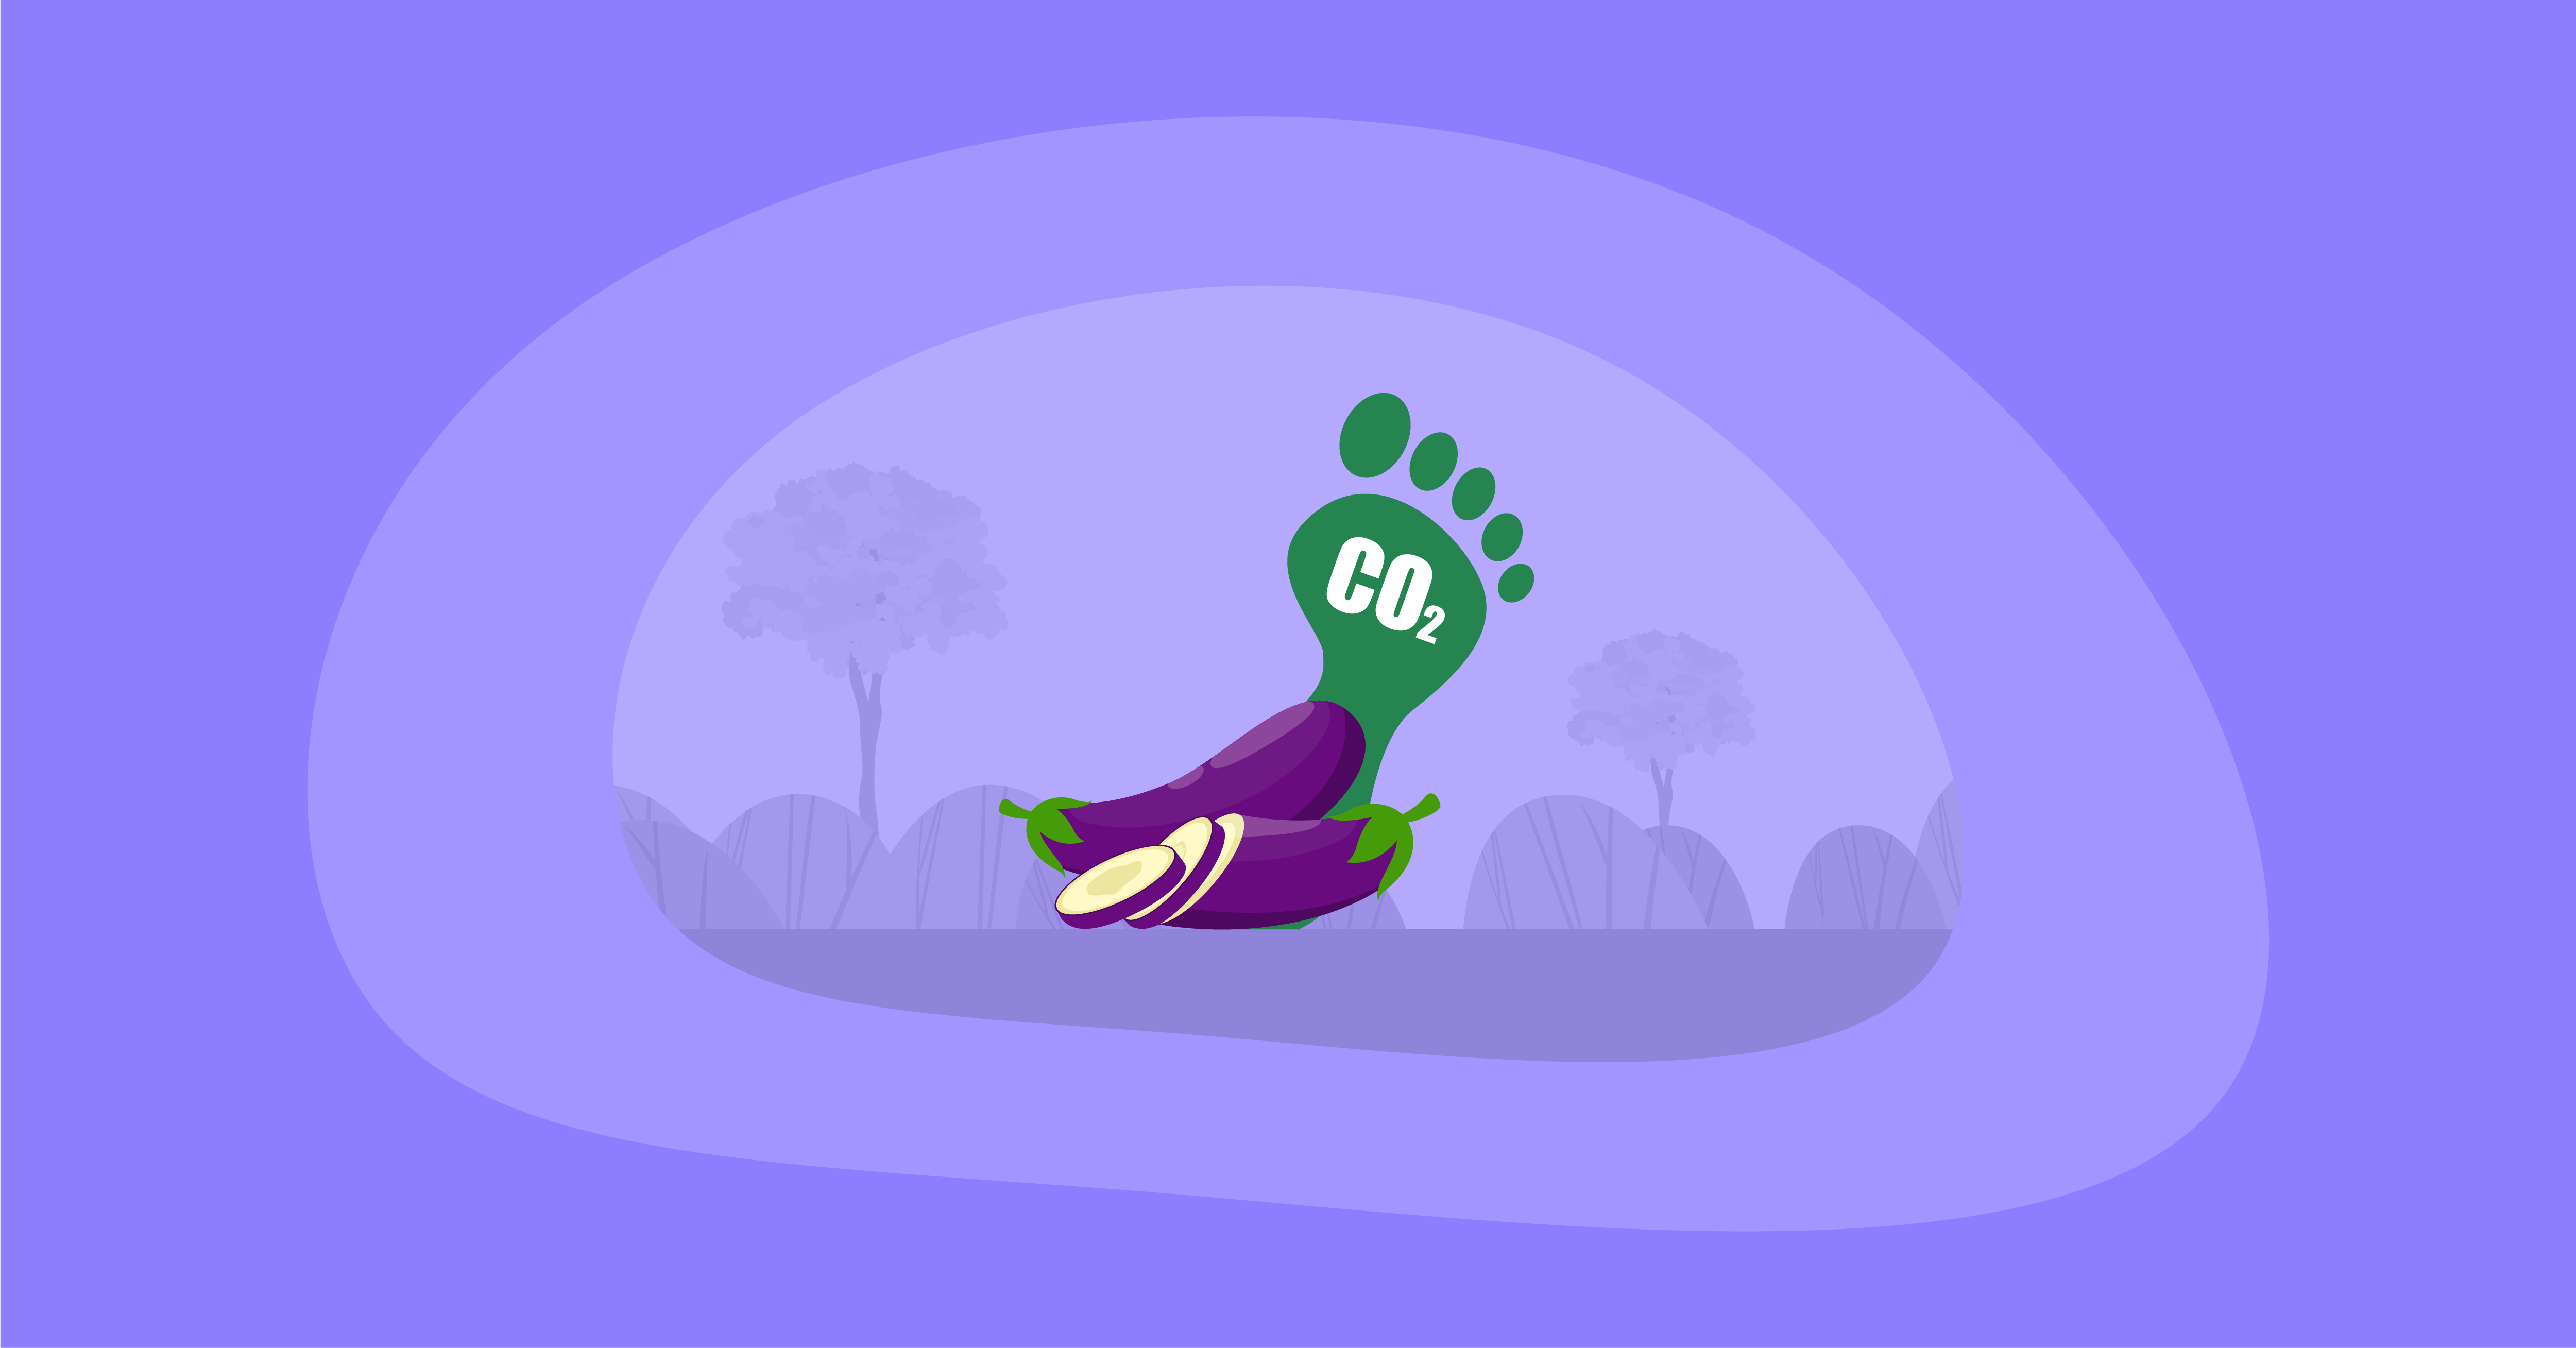 Illustration of eggplants with their carbon footprint